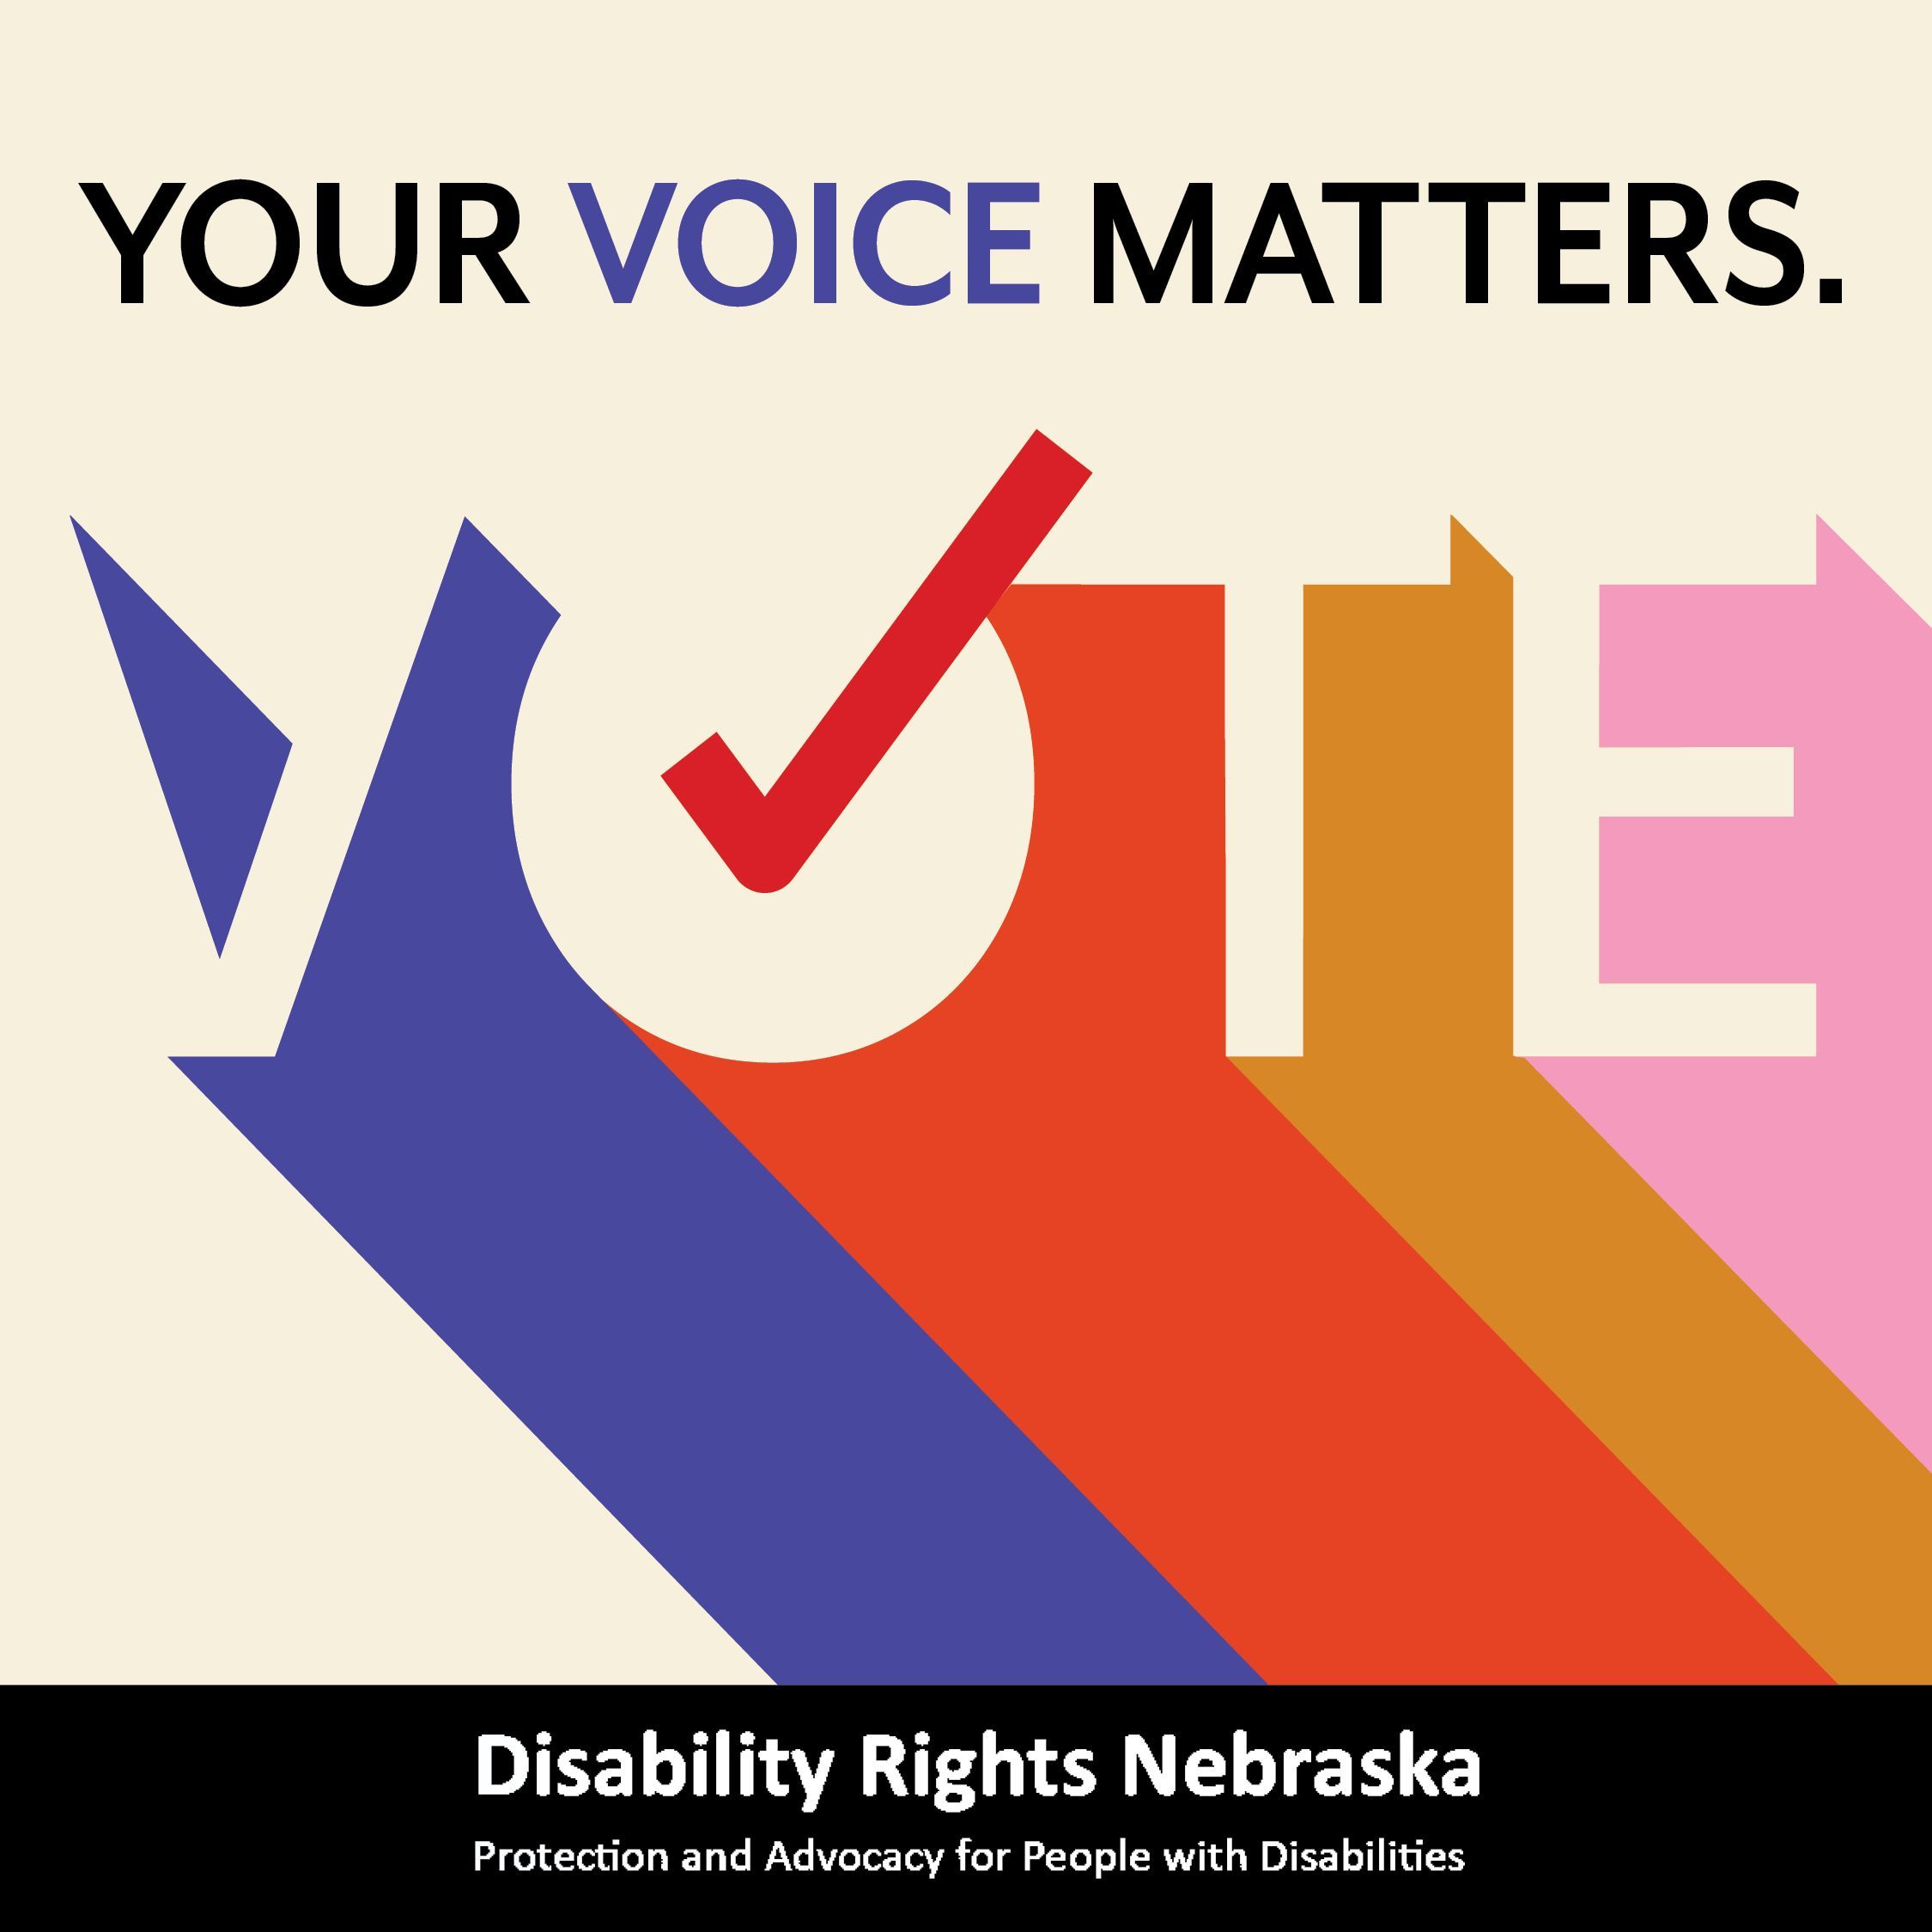 Picture: Your voice matters and Vote with a checkmark different colors